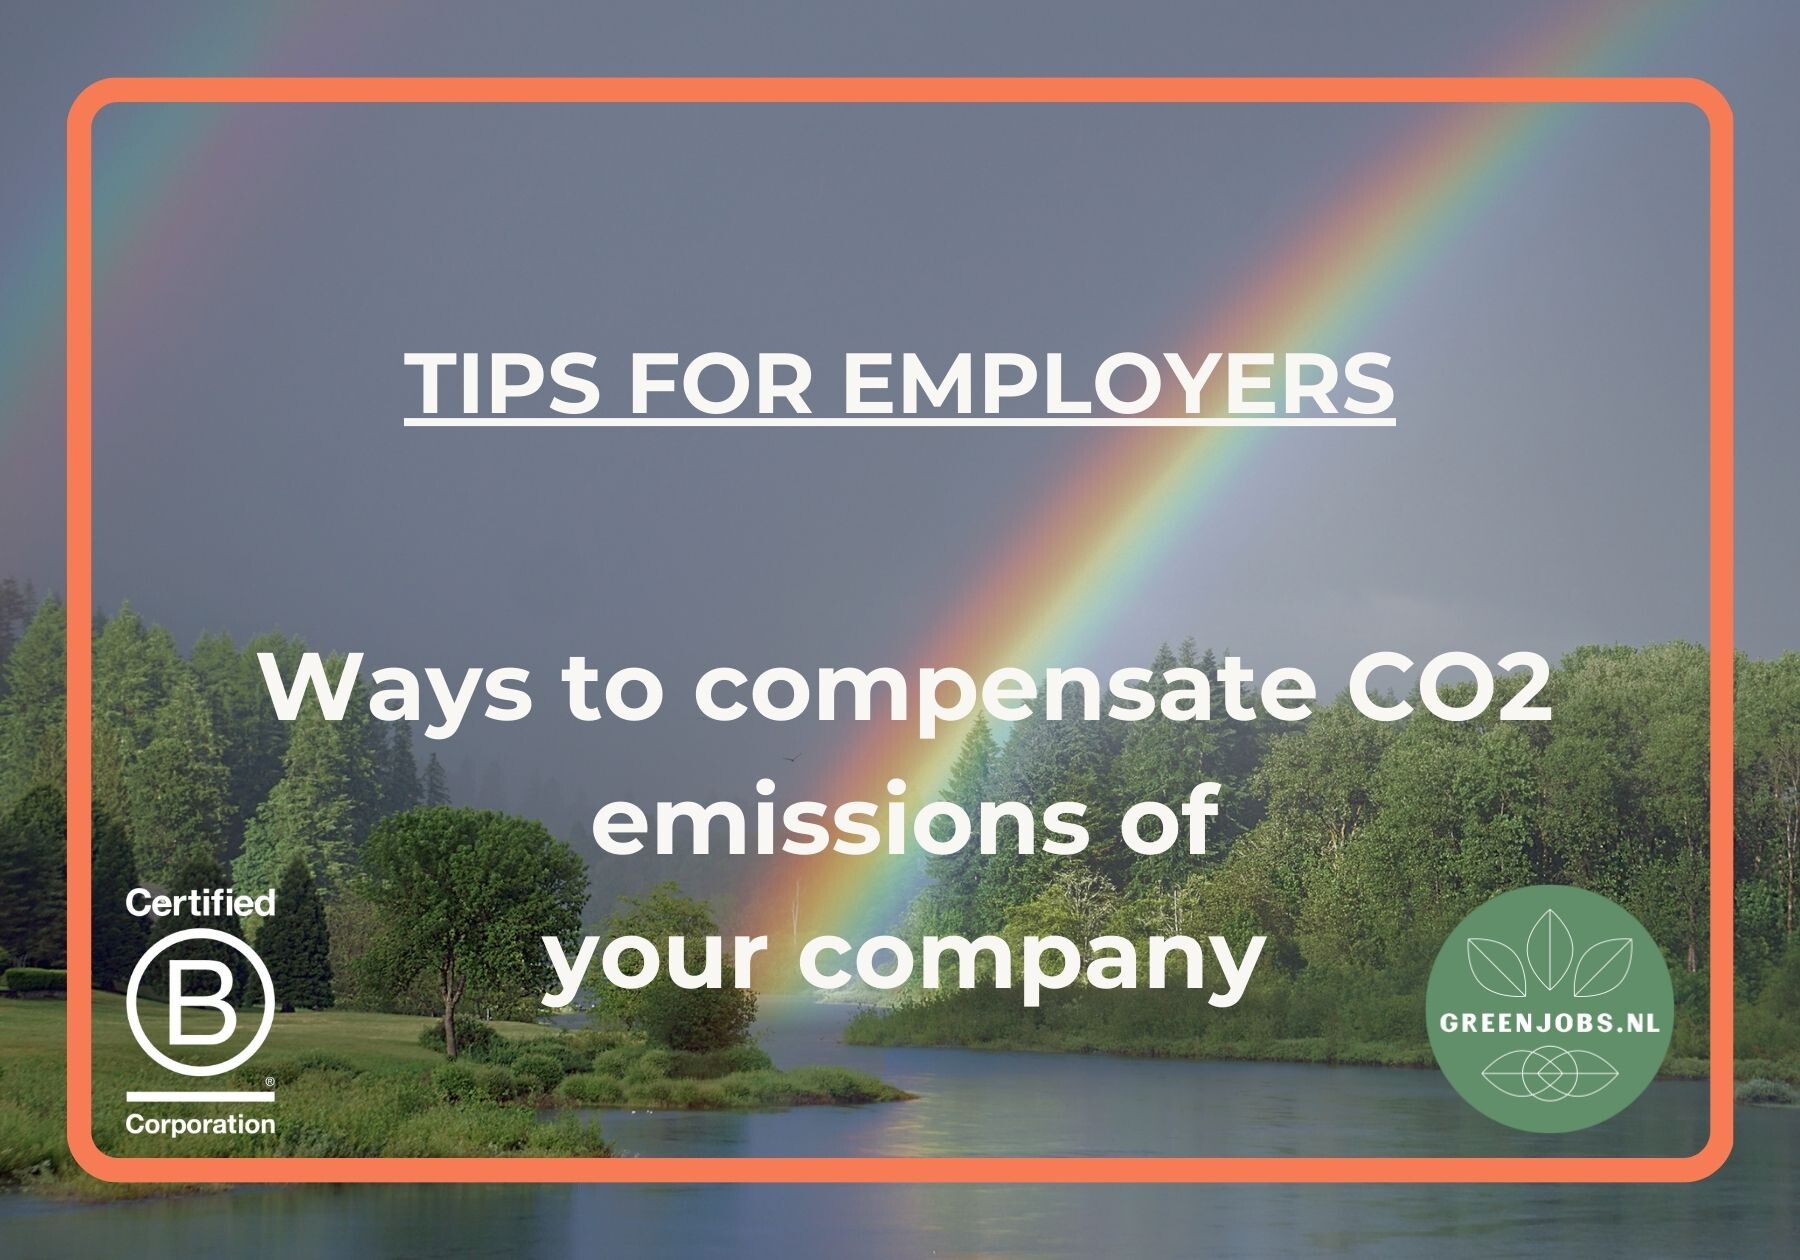 Ways to compensate CO2 emissions of your company